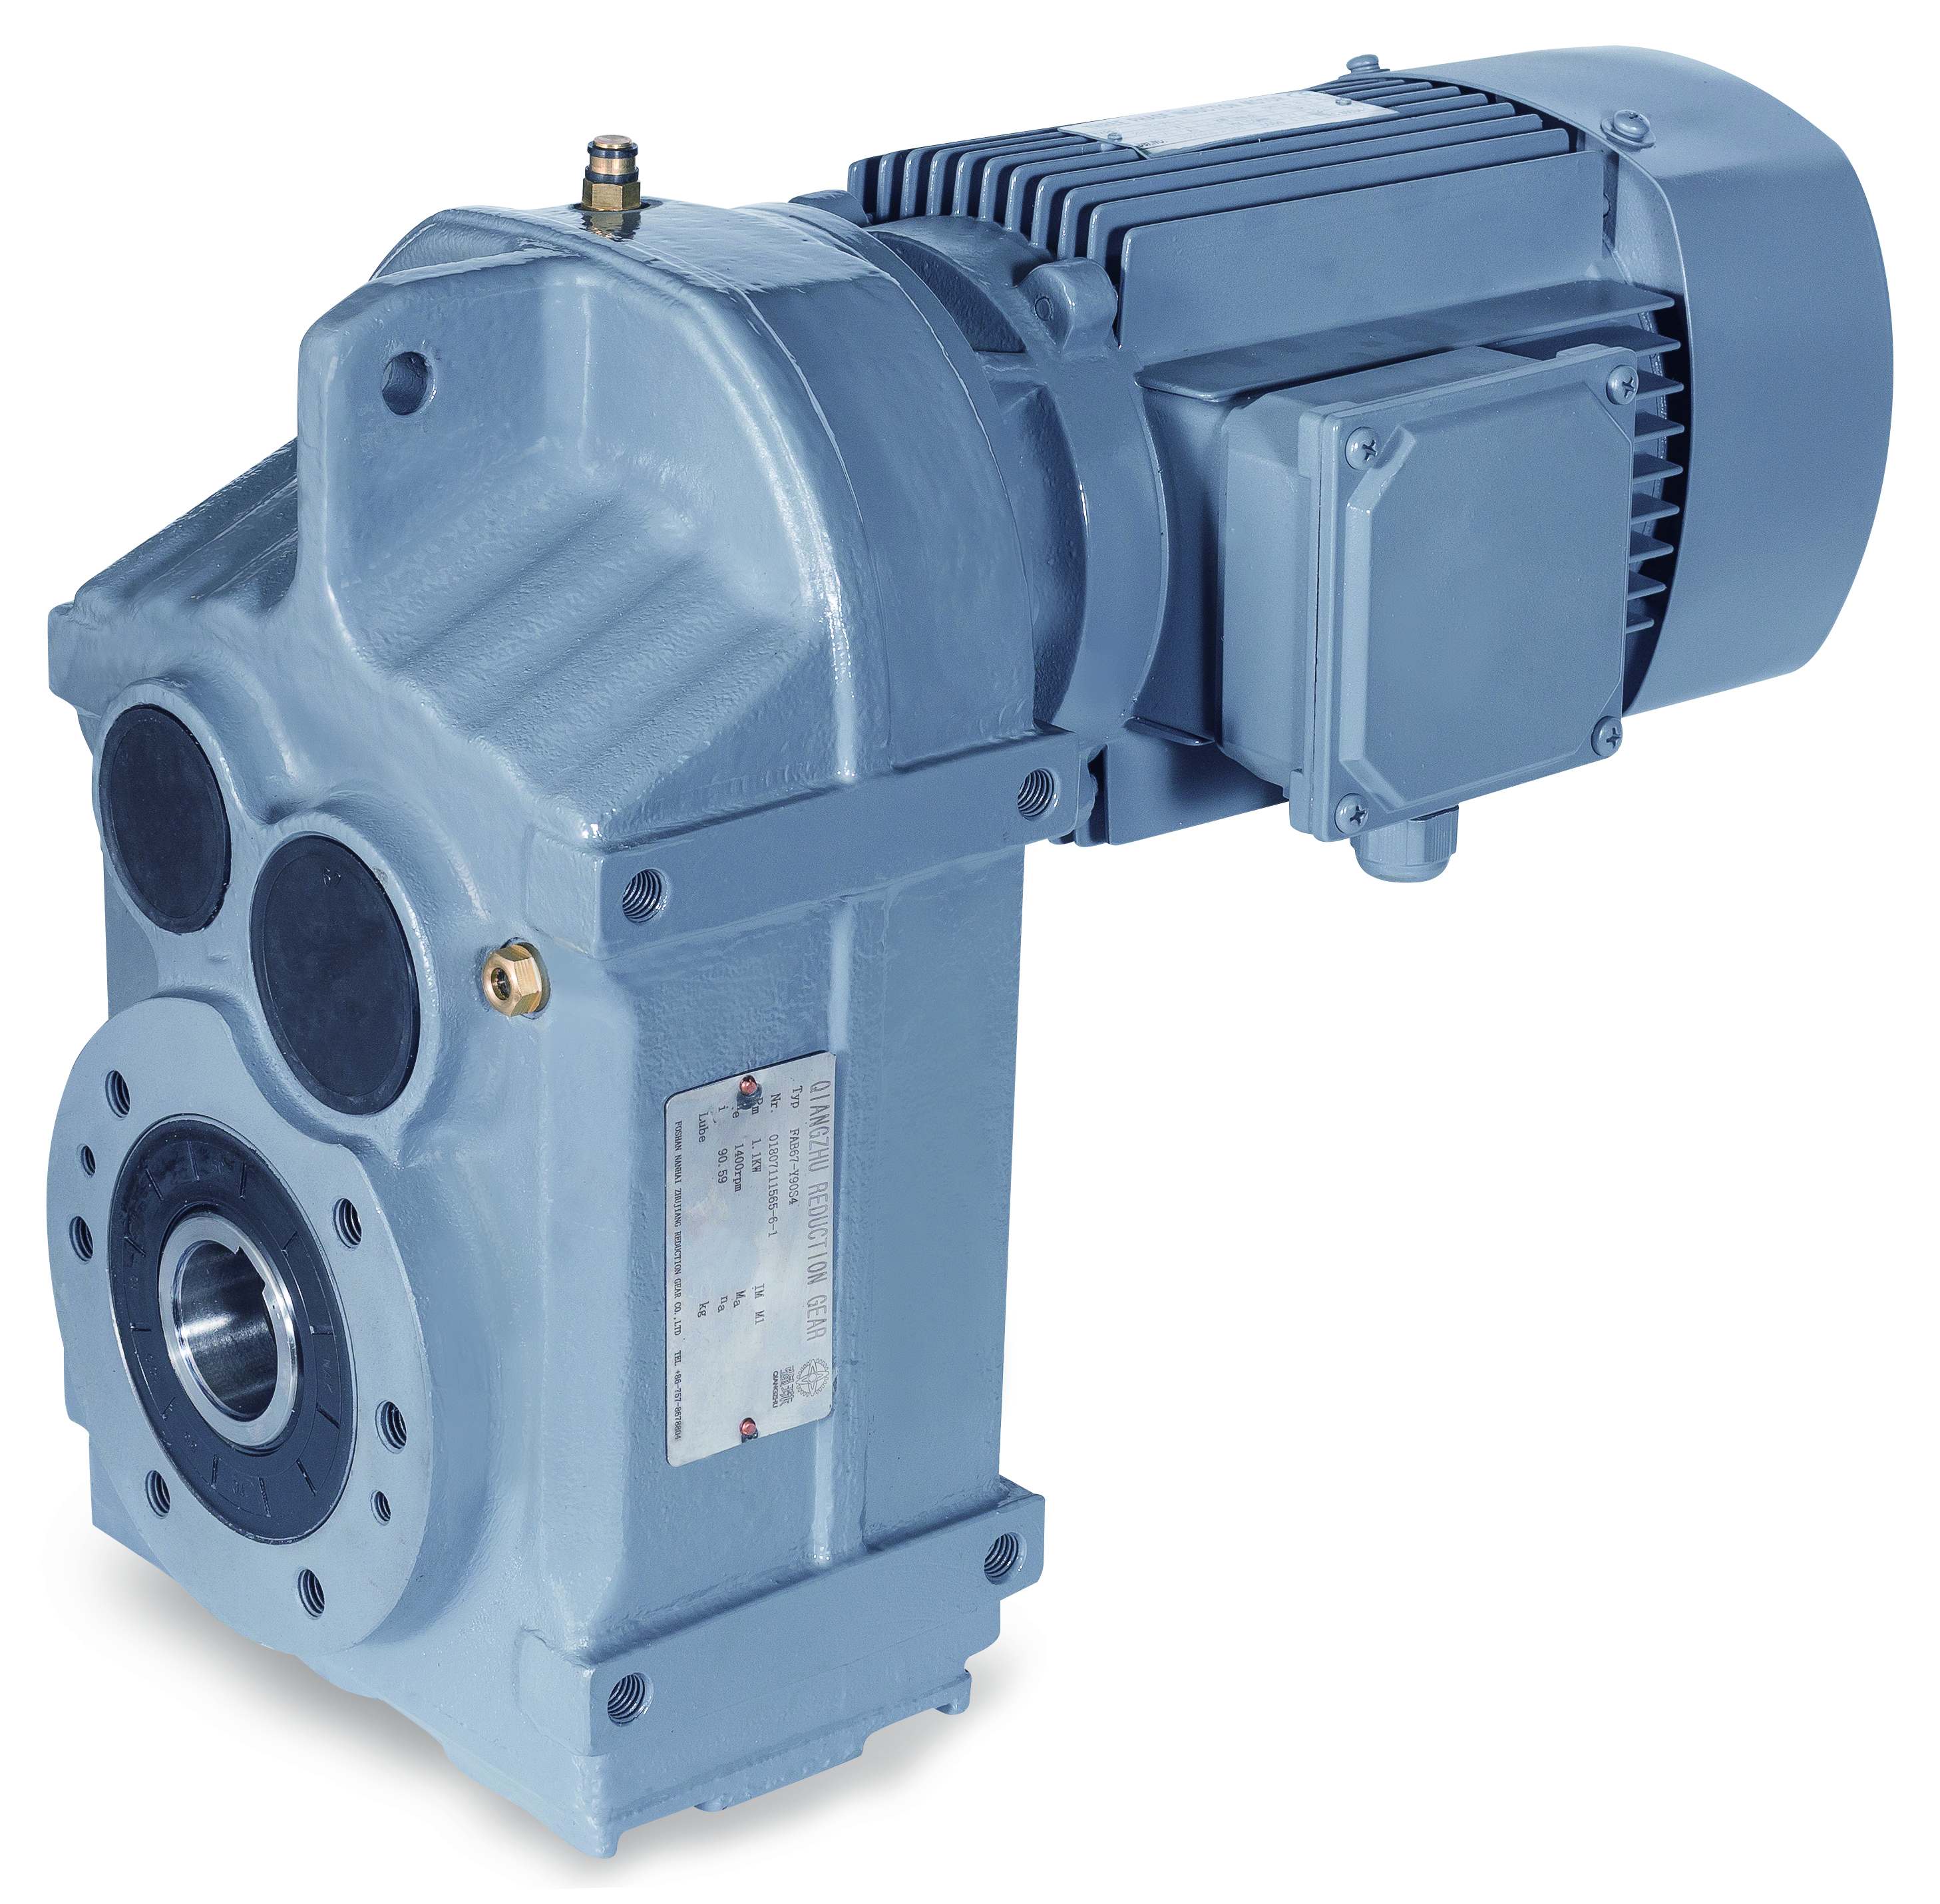 function of parallel inline worm gear reduce